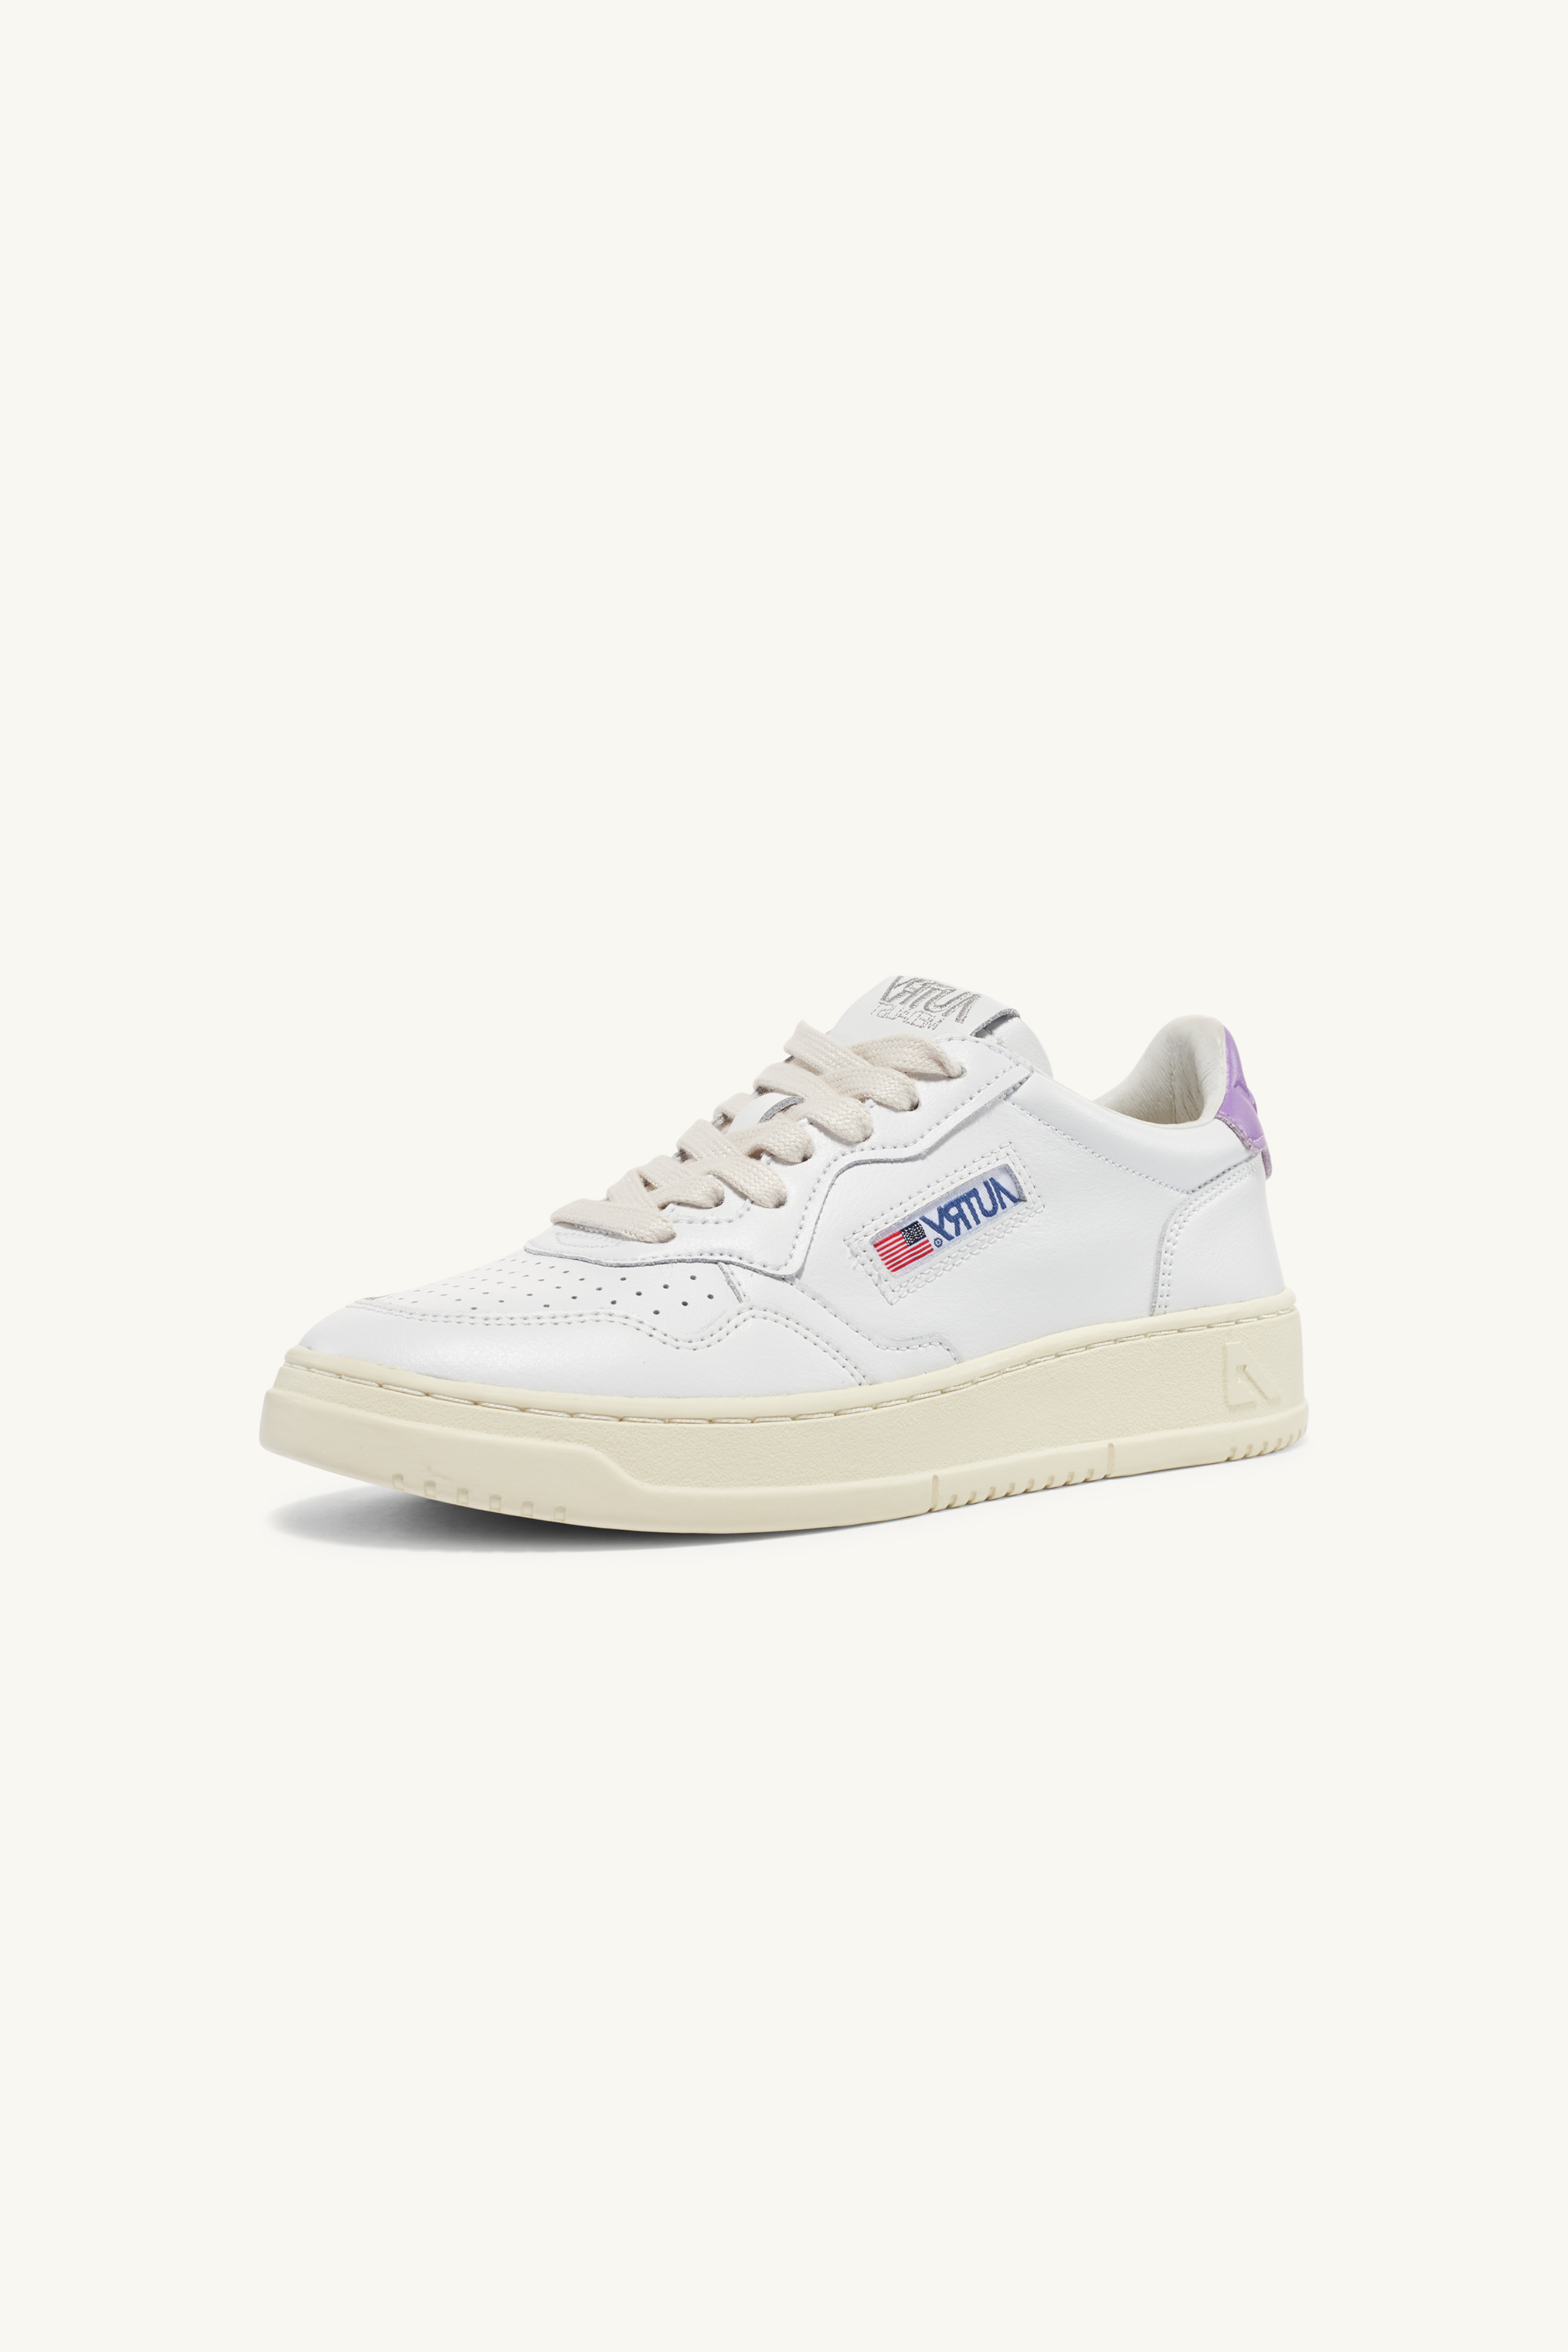 AULW-LL59 - MEDALIST LOW SNEAKER - WHITE/LILAC